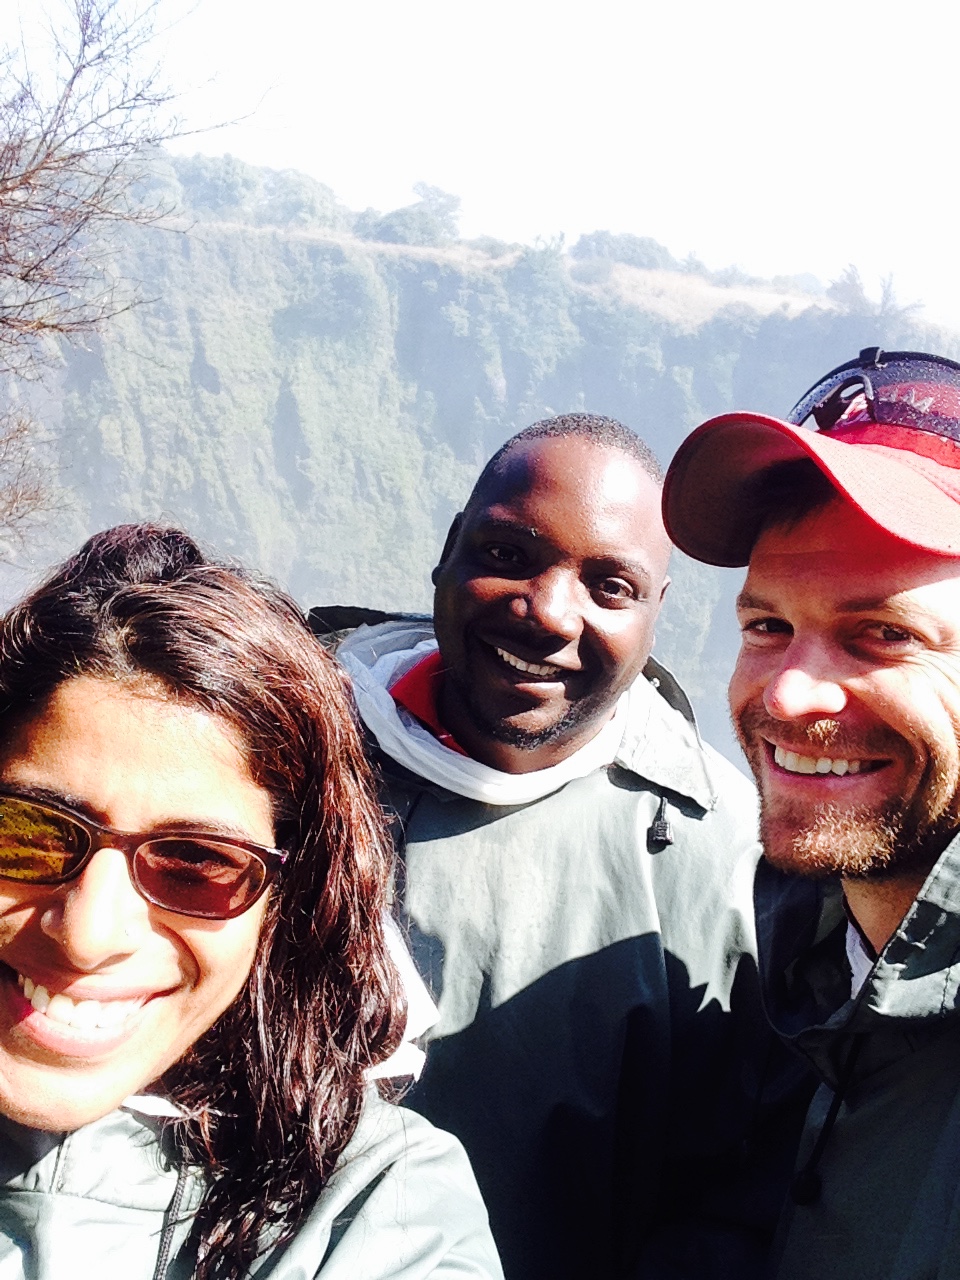 Shahzeen, Allan, and Drew - Happy and soaked at Victoria Falls, Zambia 2015